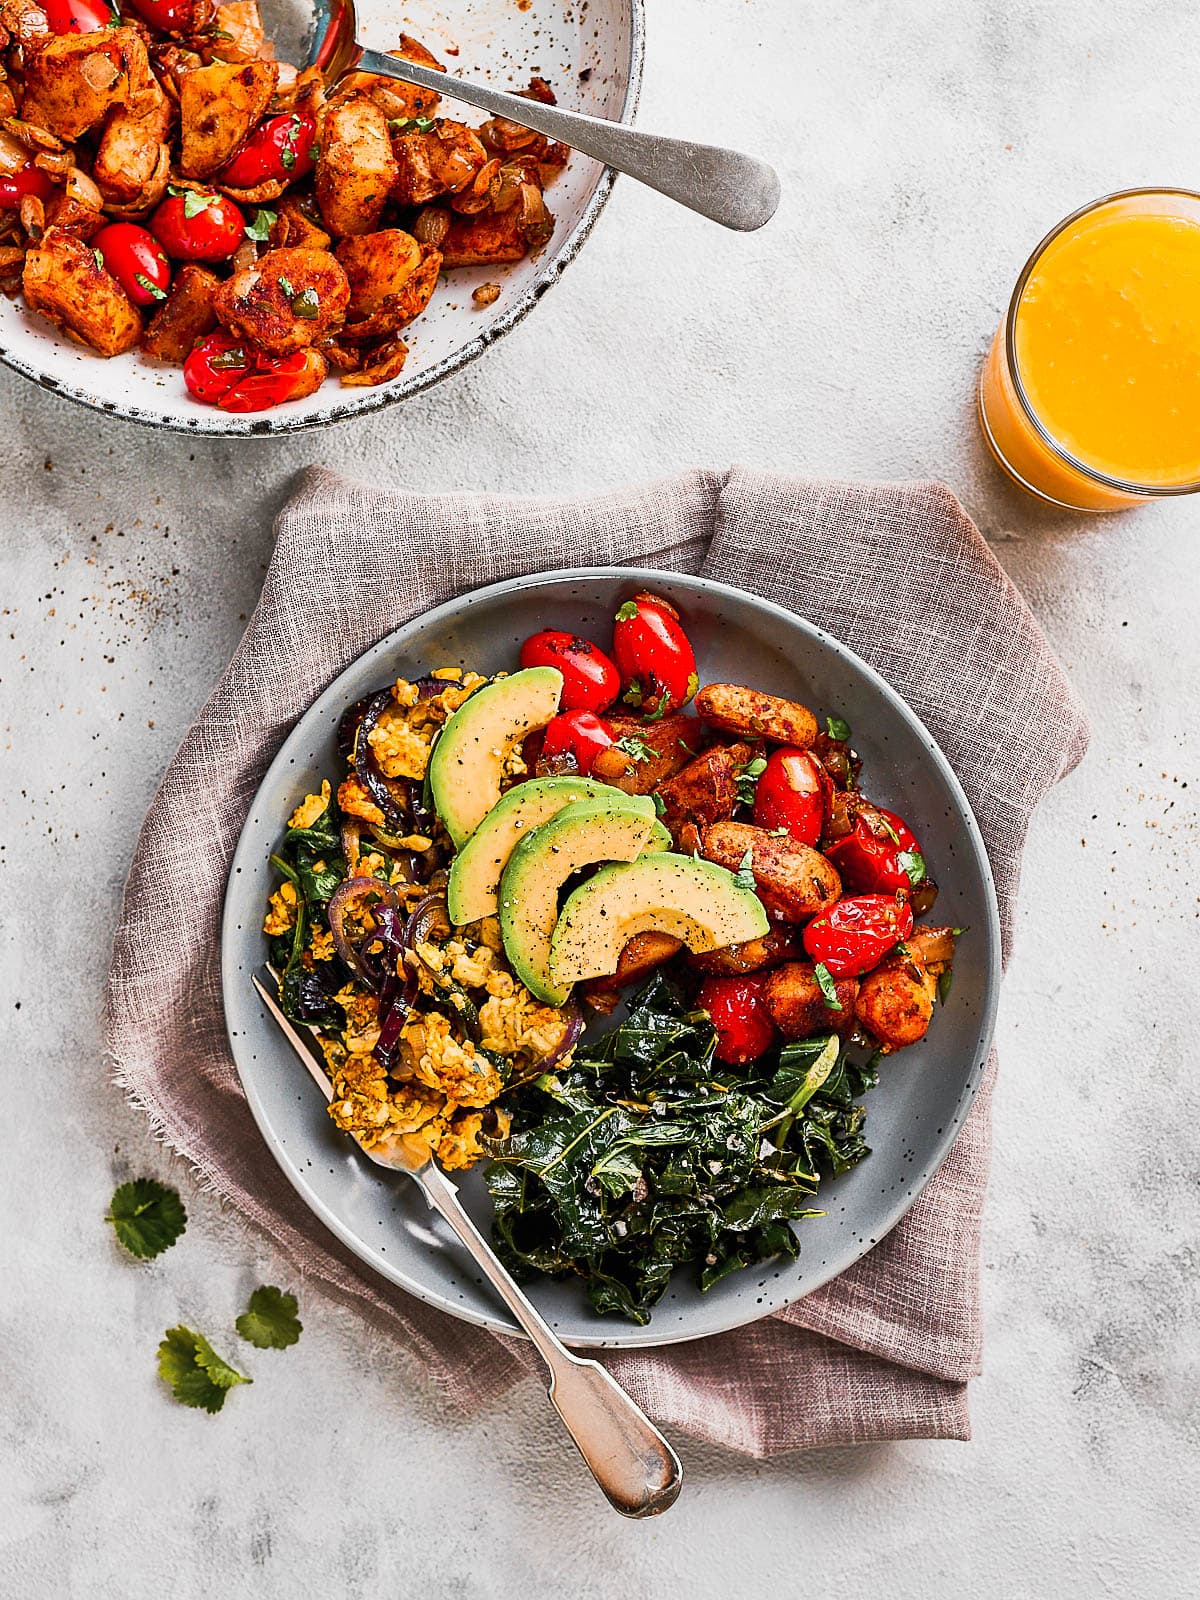 Mexican breakfast potatoes on a plate with sauteed kale and tofu scramble. A serving bowl of breakfast potatoes in the background.